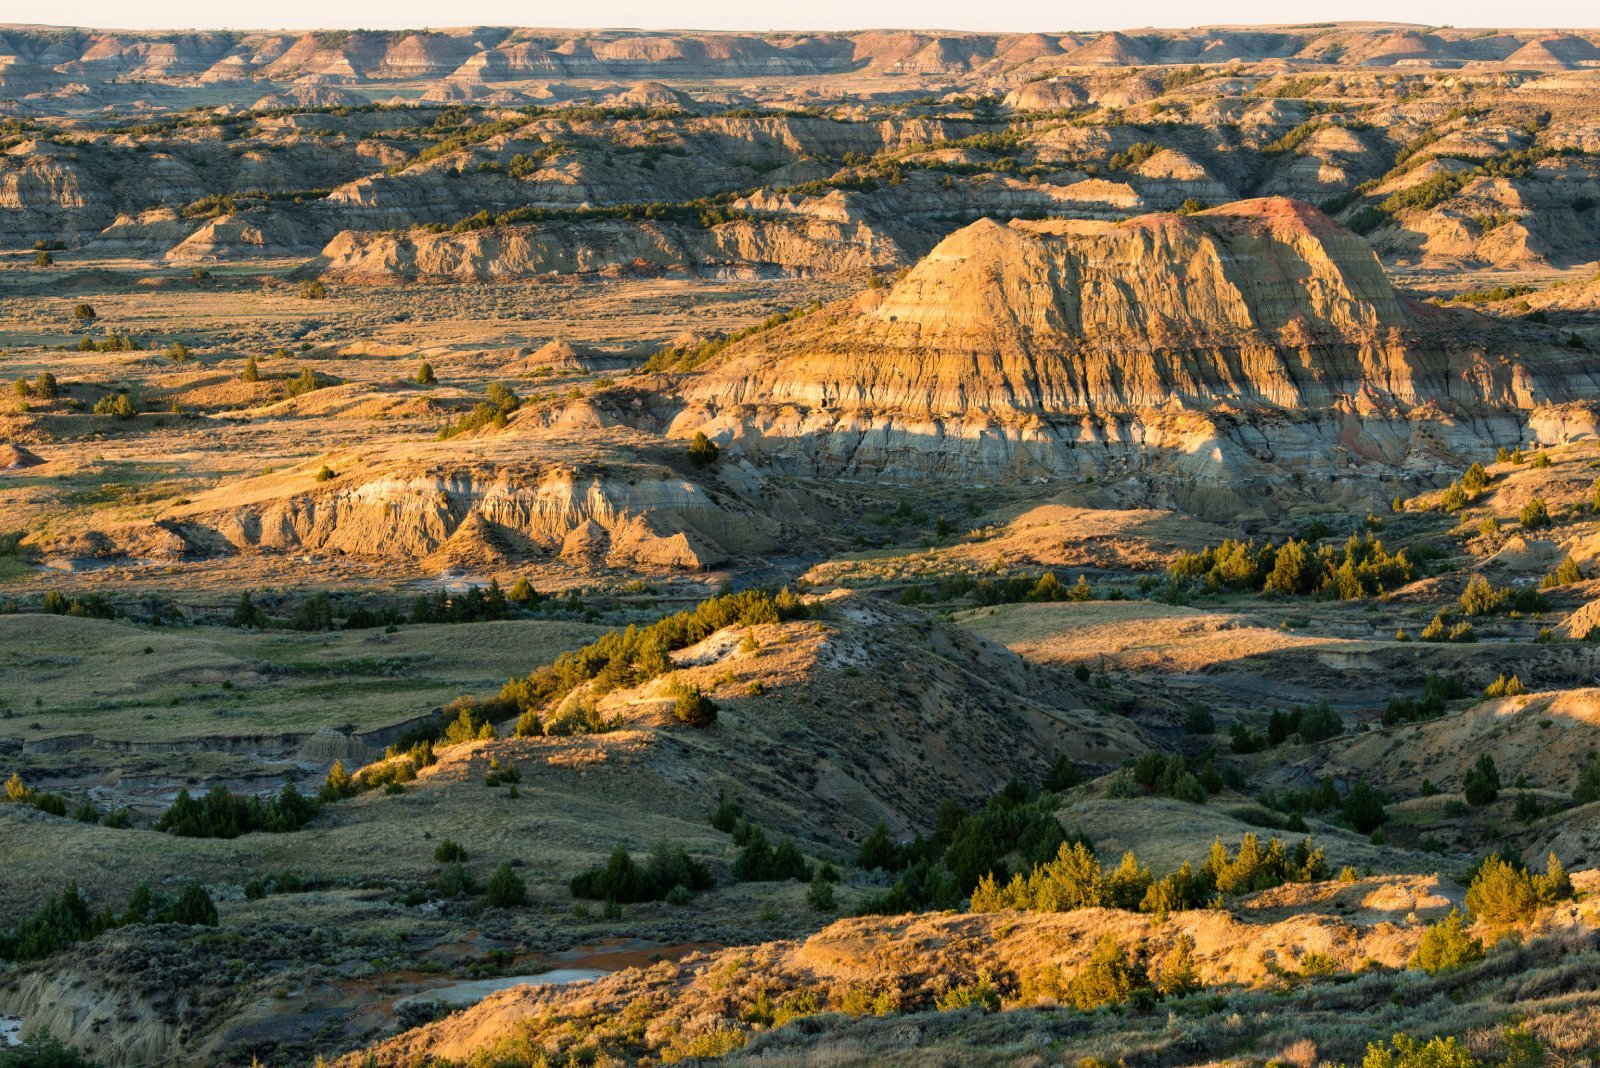 <p class="wp-caption-text">Image Credit: Shutterstock / Nagel Photography</p>  <p><span>Its remote location and cold winters deter some, but the rugged Badlands and the serene beauty of Theodore Roosevelt National Park are North Dakota’s quiet treasures.</span></p>